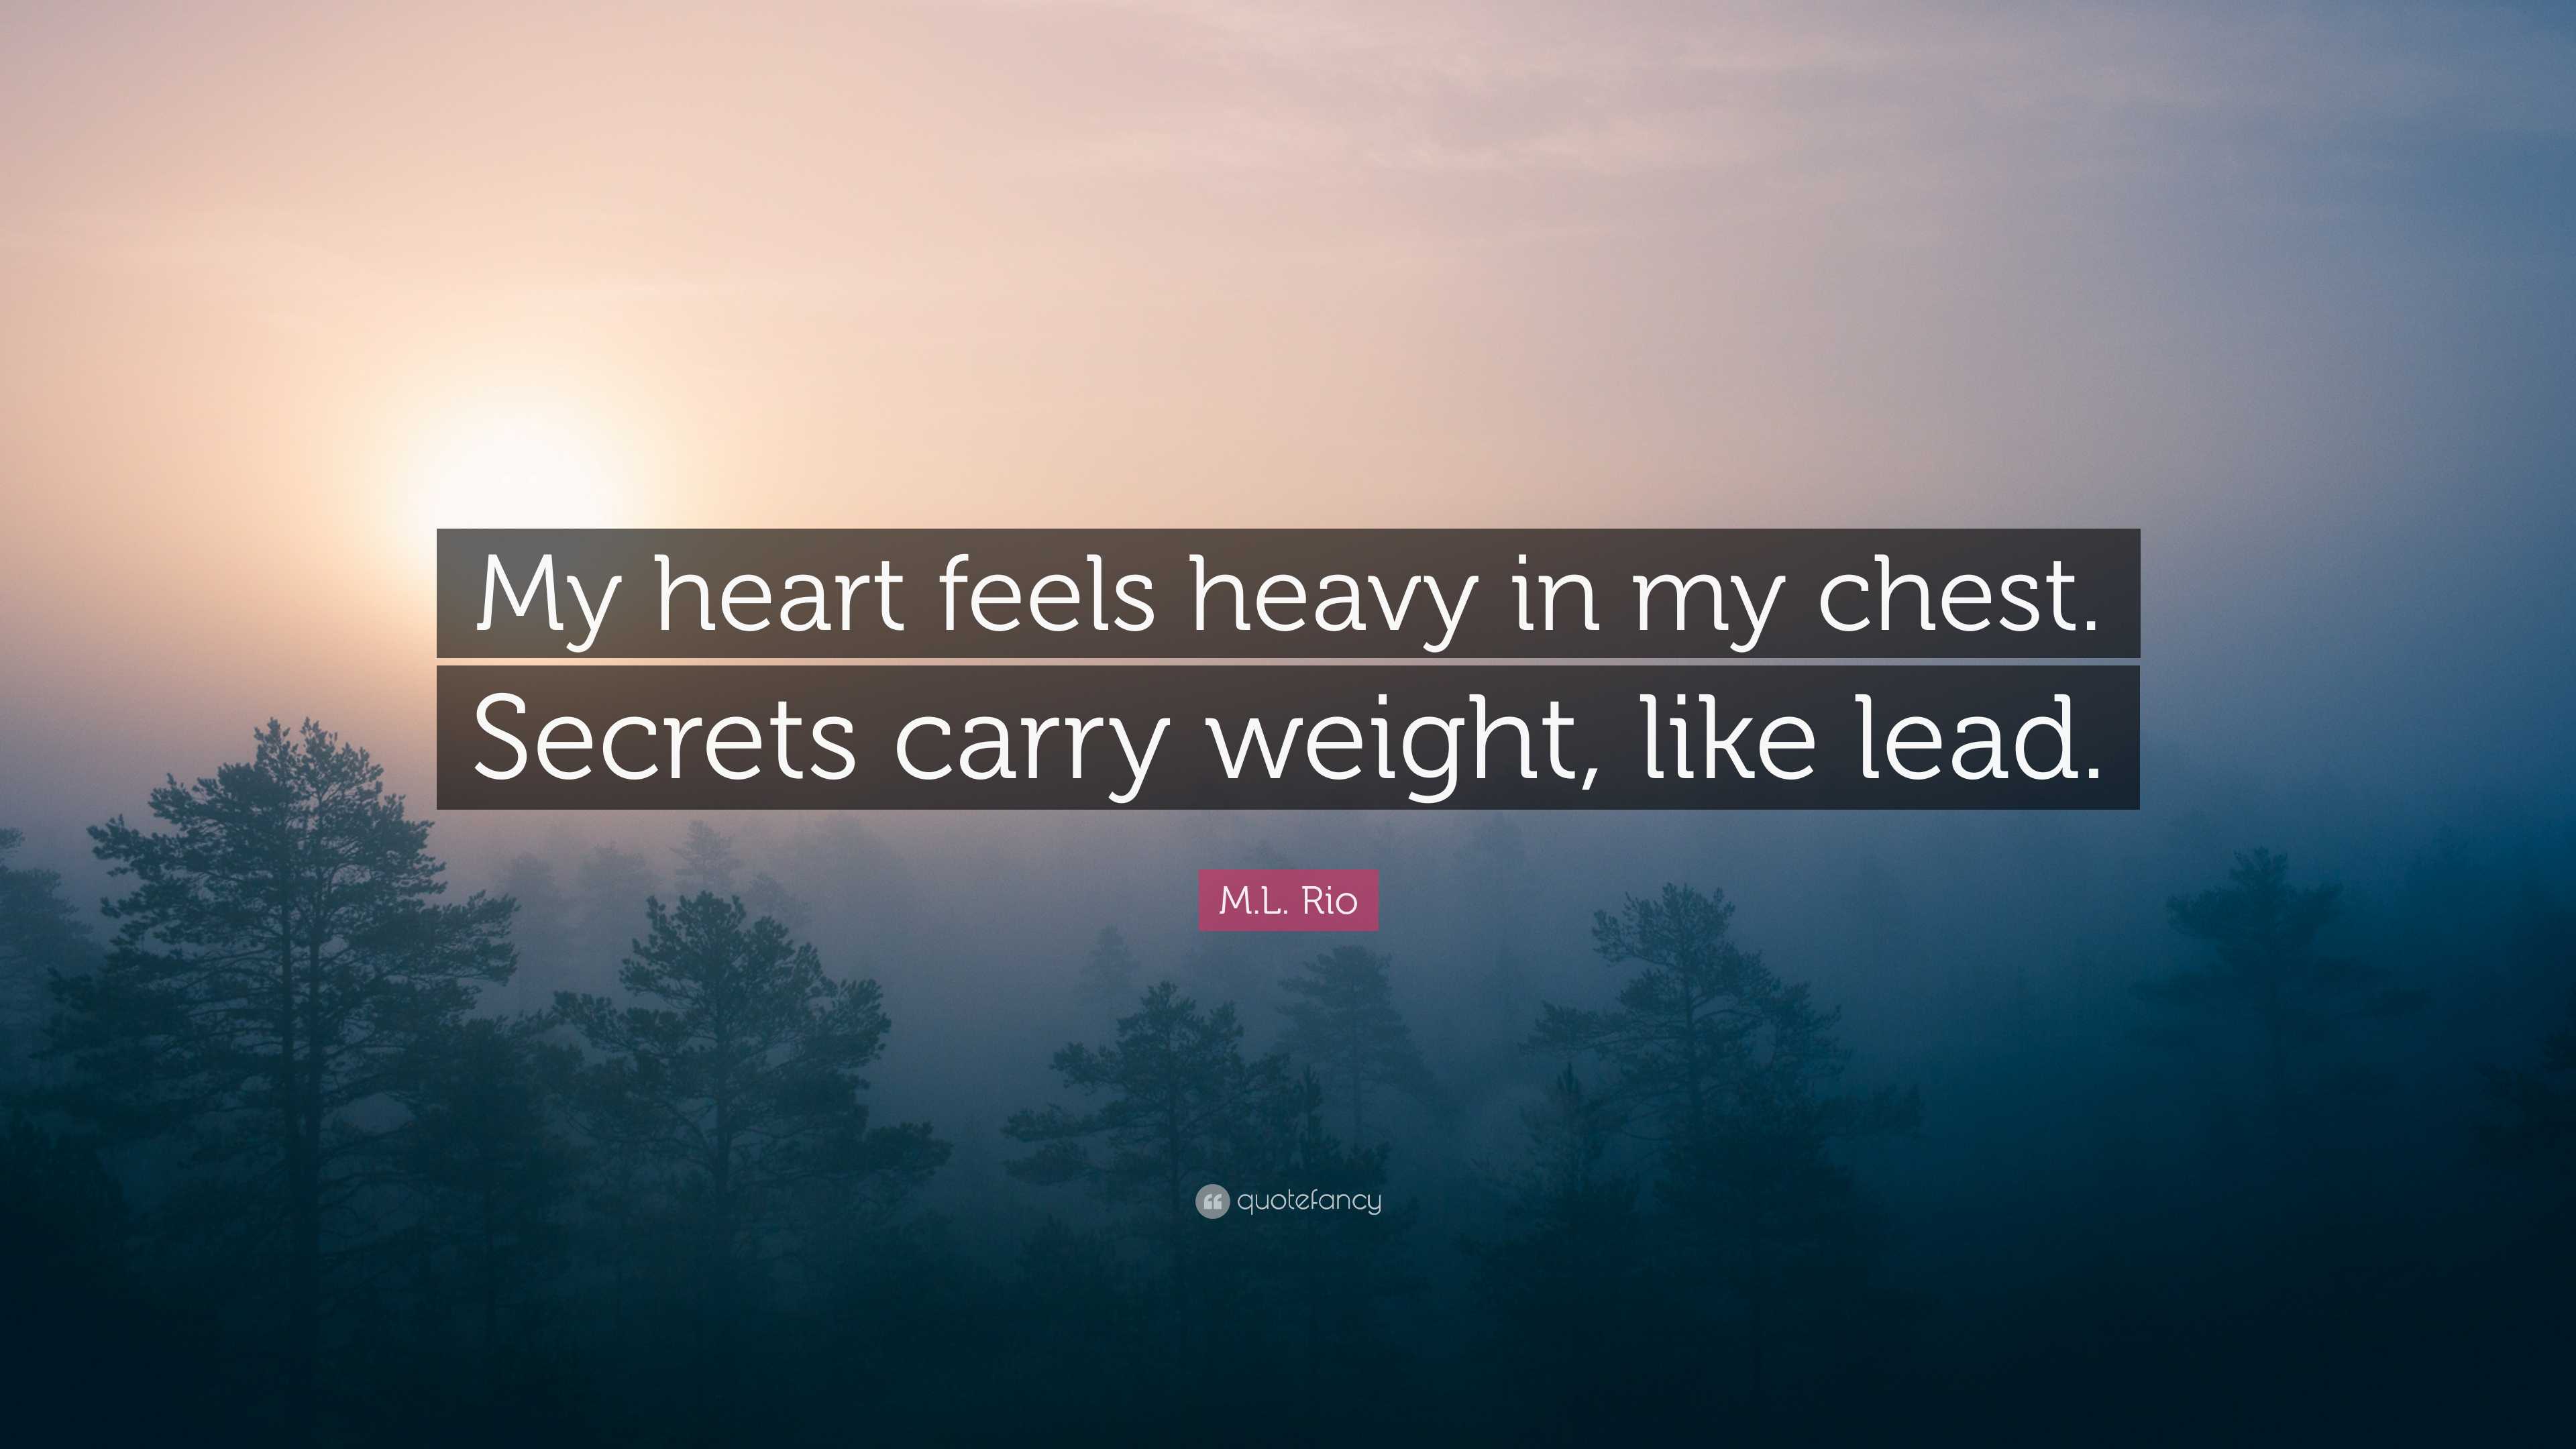 https://quotefancy.com/media/wallpaper/3840x2160/8082884-M-L-Rio-Quote-My-heart-feels-heavy-in-my-chest-Secrets-carry-weight-like-lead.jpg